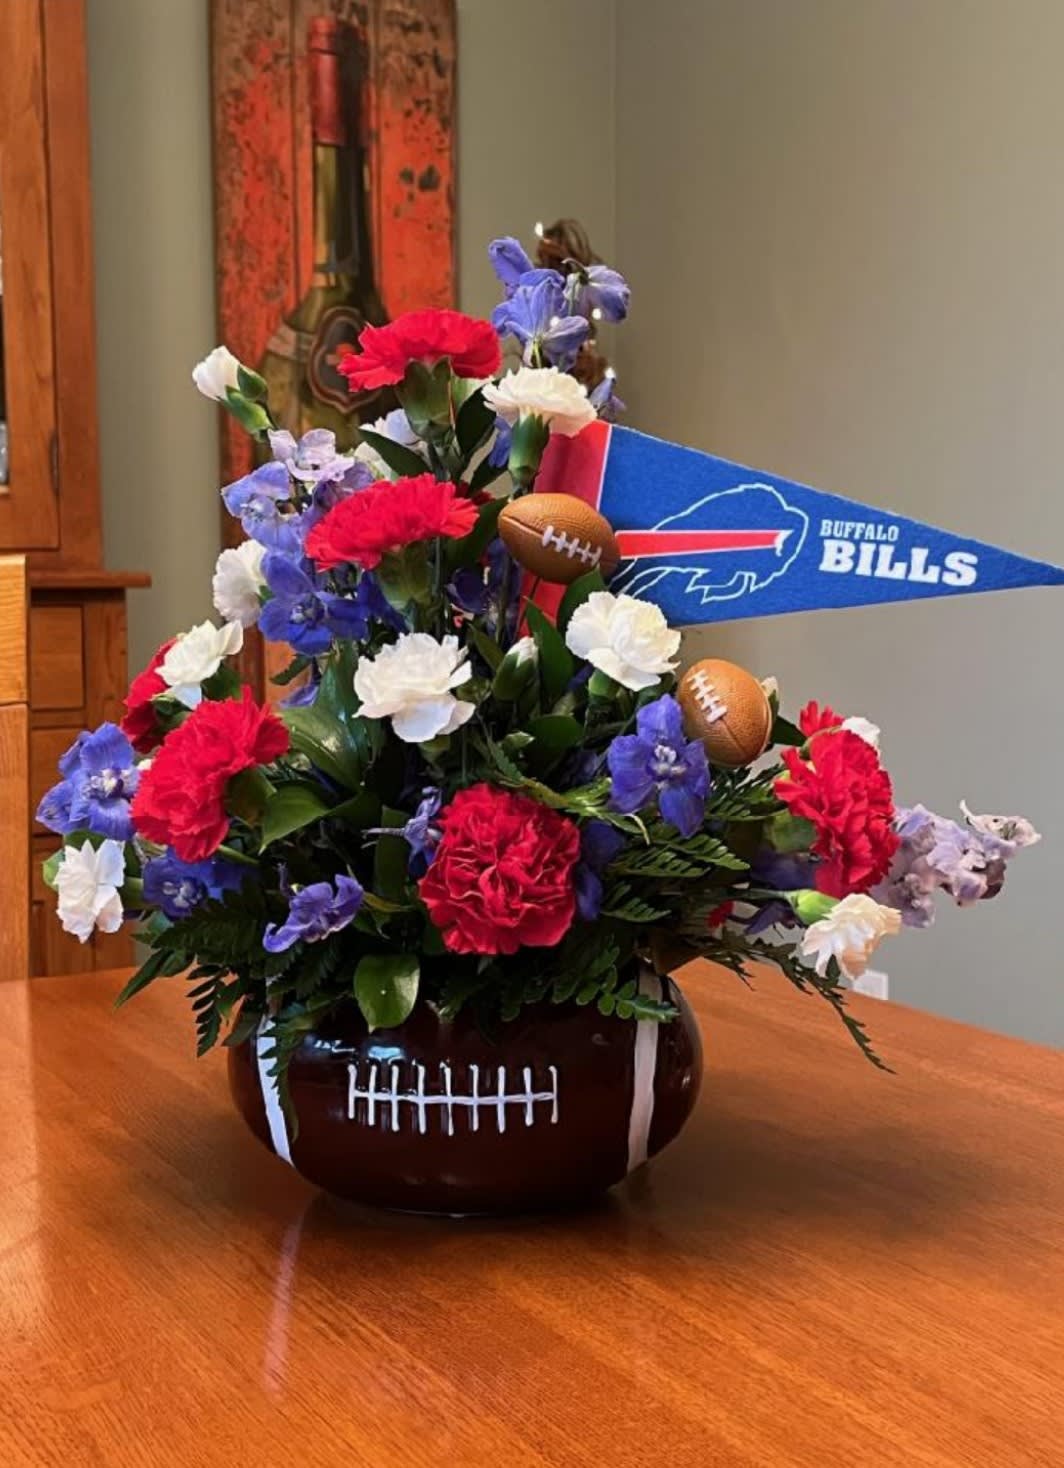 Bills Football Bouquet - For the Bill-iver that likes to show what Bills Country is all about! The perfect arrangement of bright red carnations, blue delphinium and white mini carnations are gathered with seasonal greens in a ceramic football vase along with an Bills flag and miniature footballs. Add some Red Roses with the deluxe version or choose the Red &amp; White Rose Premium version for that ultimate fan.   Orientation: All-Around